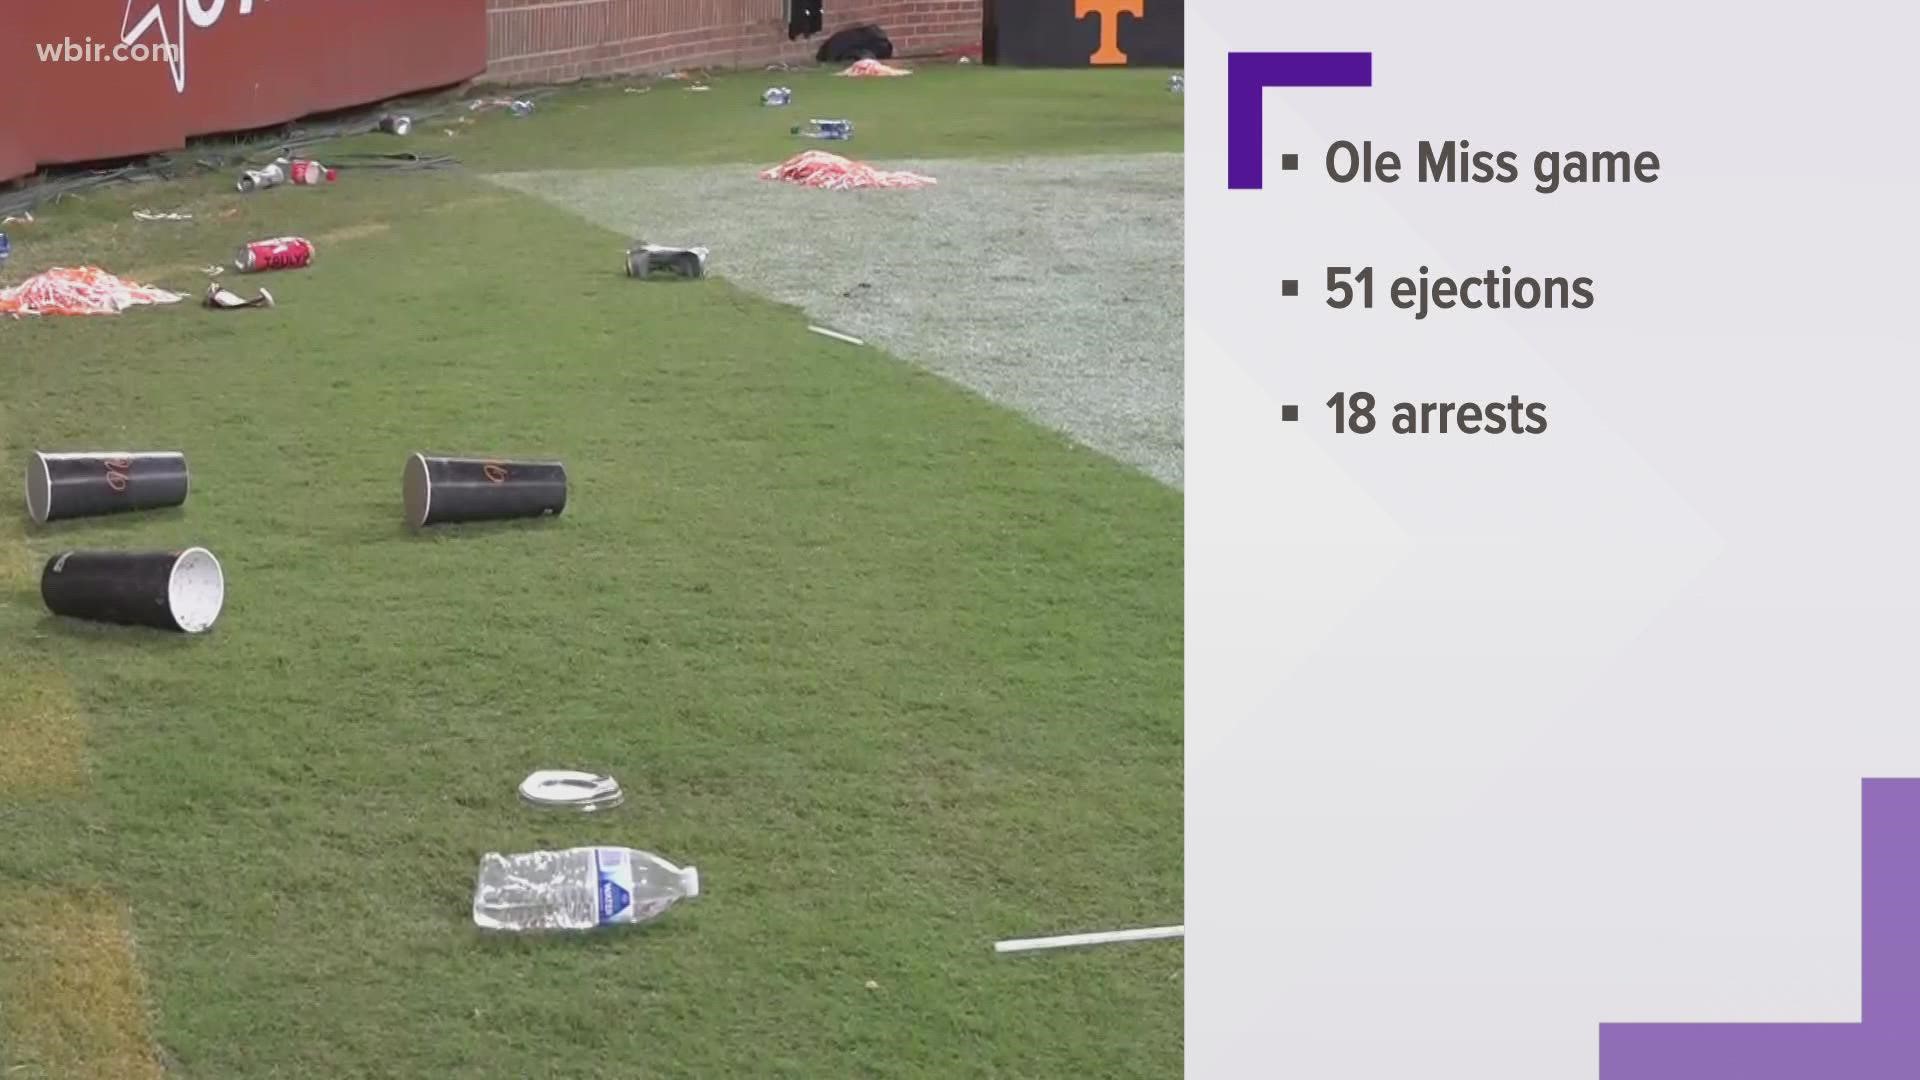 Most of the trouble came as fans tossed trash on the field following a key call on a fourth down play.